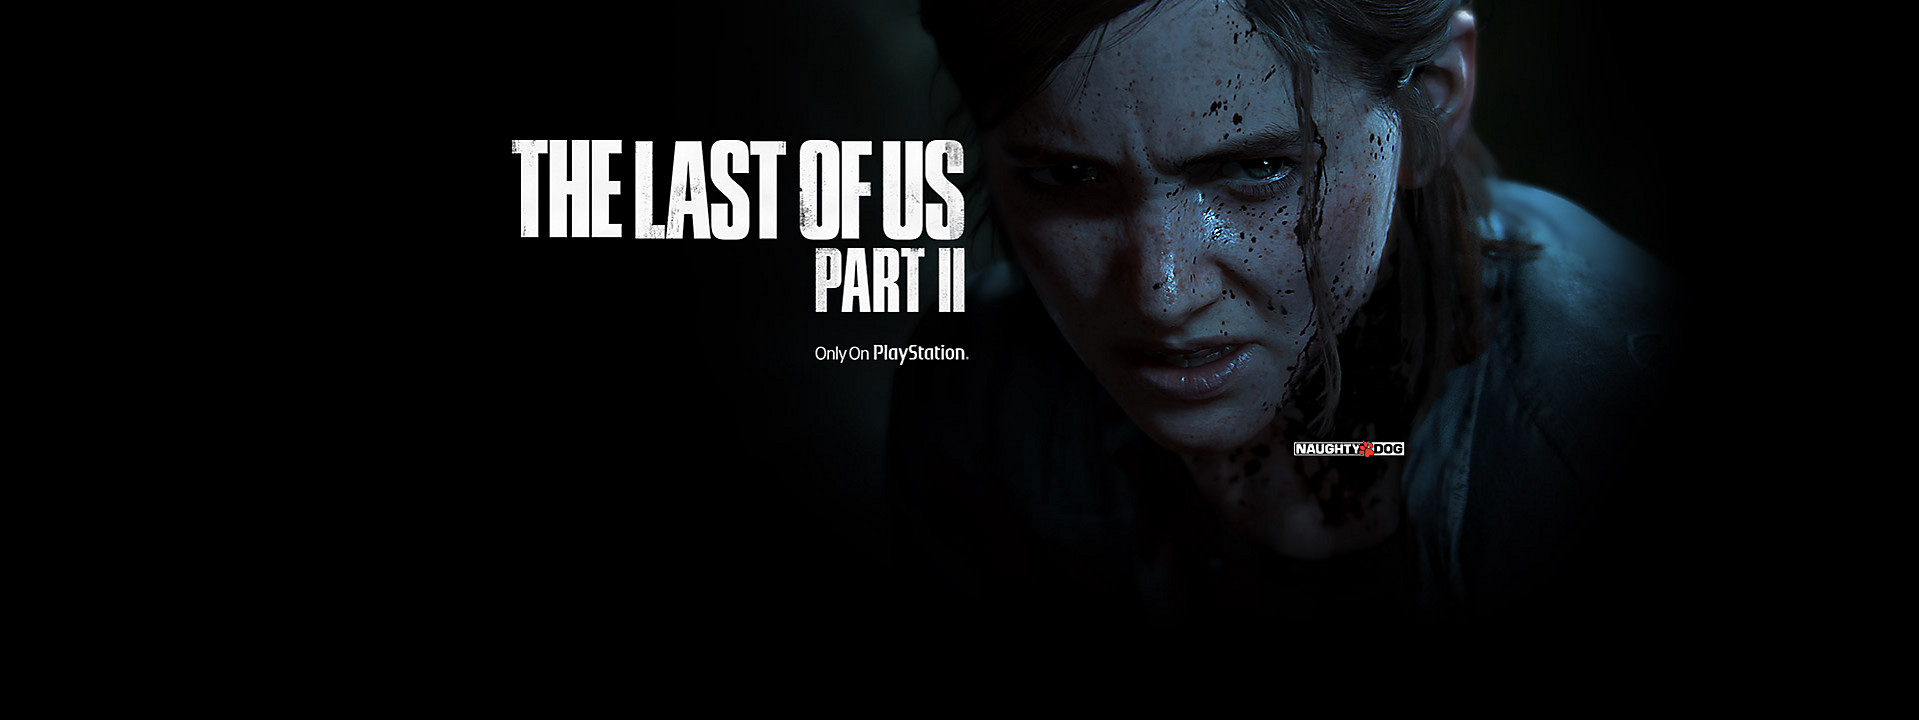 The Last of Us Part II - Now Available